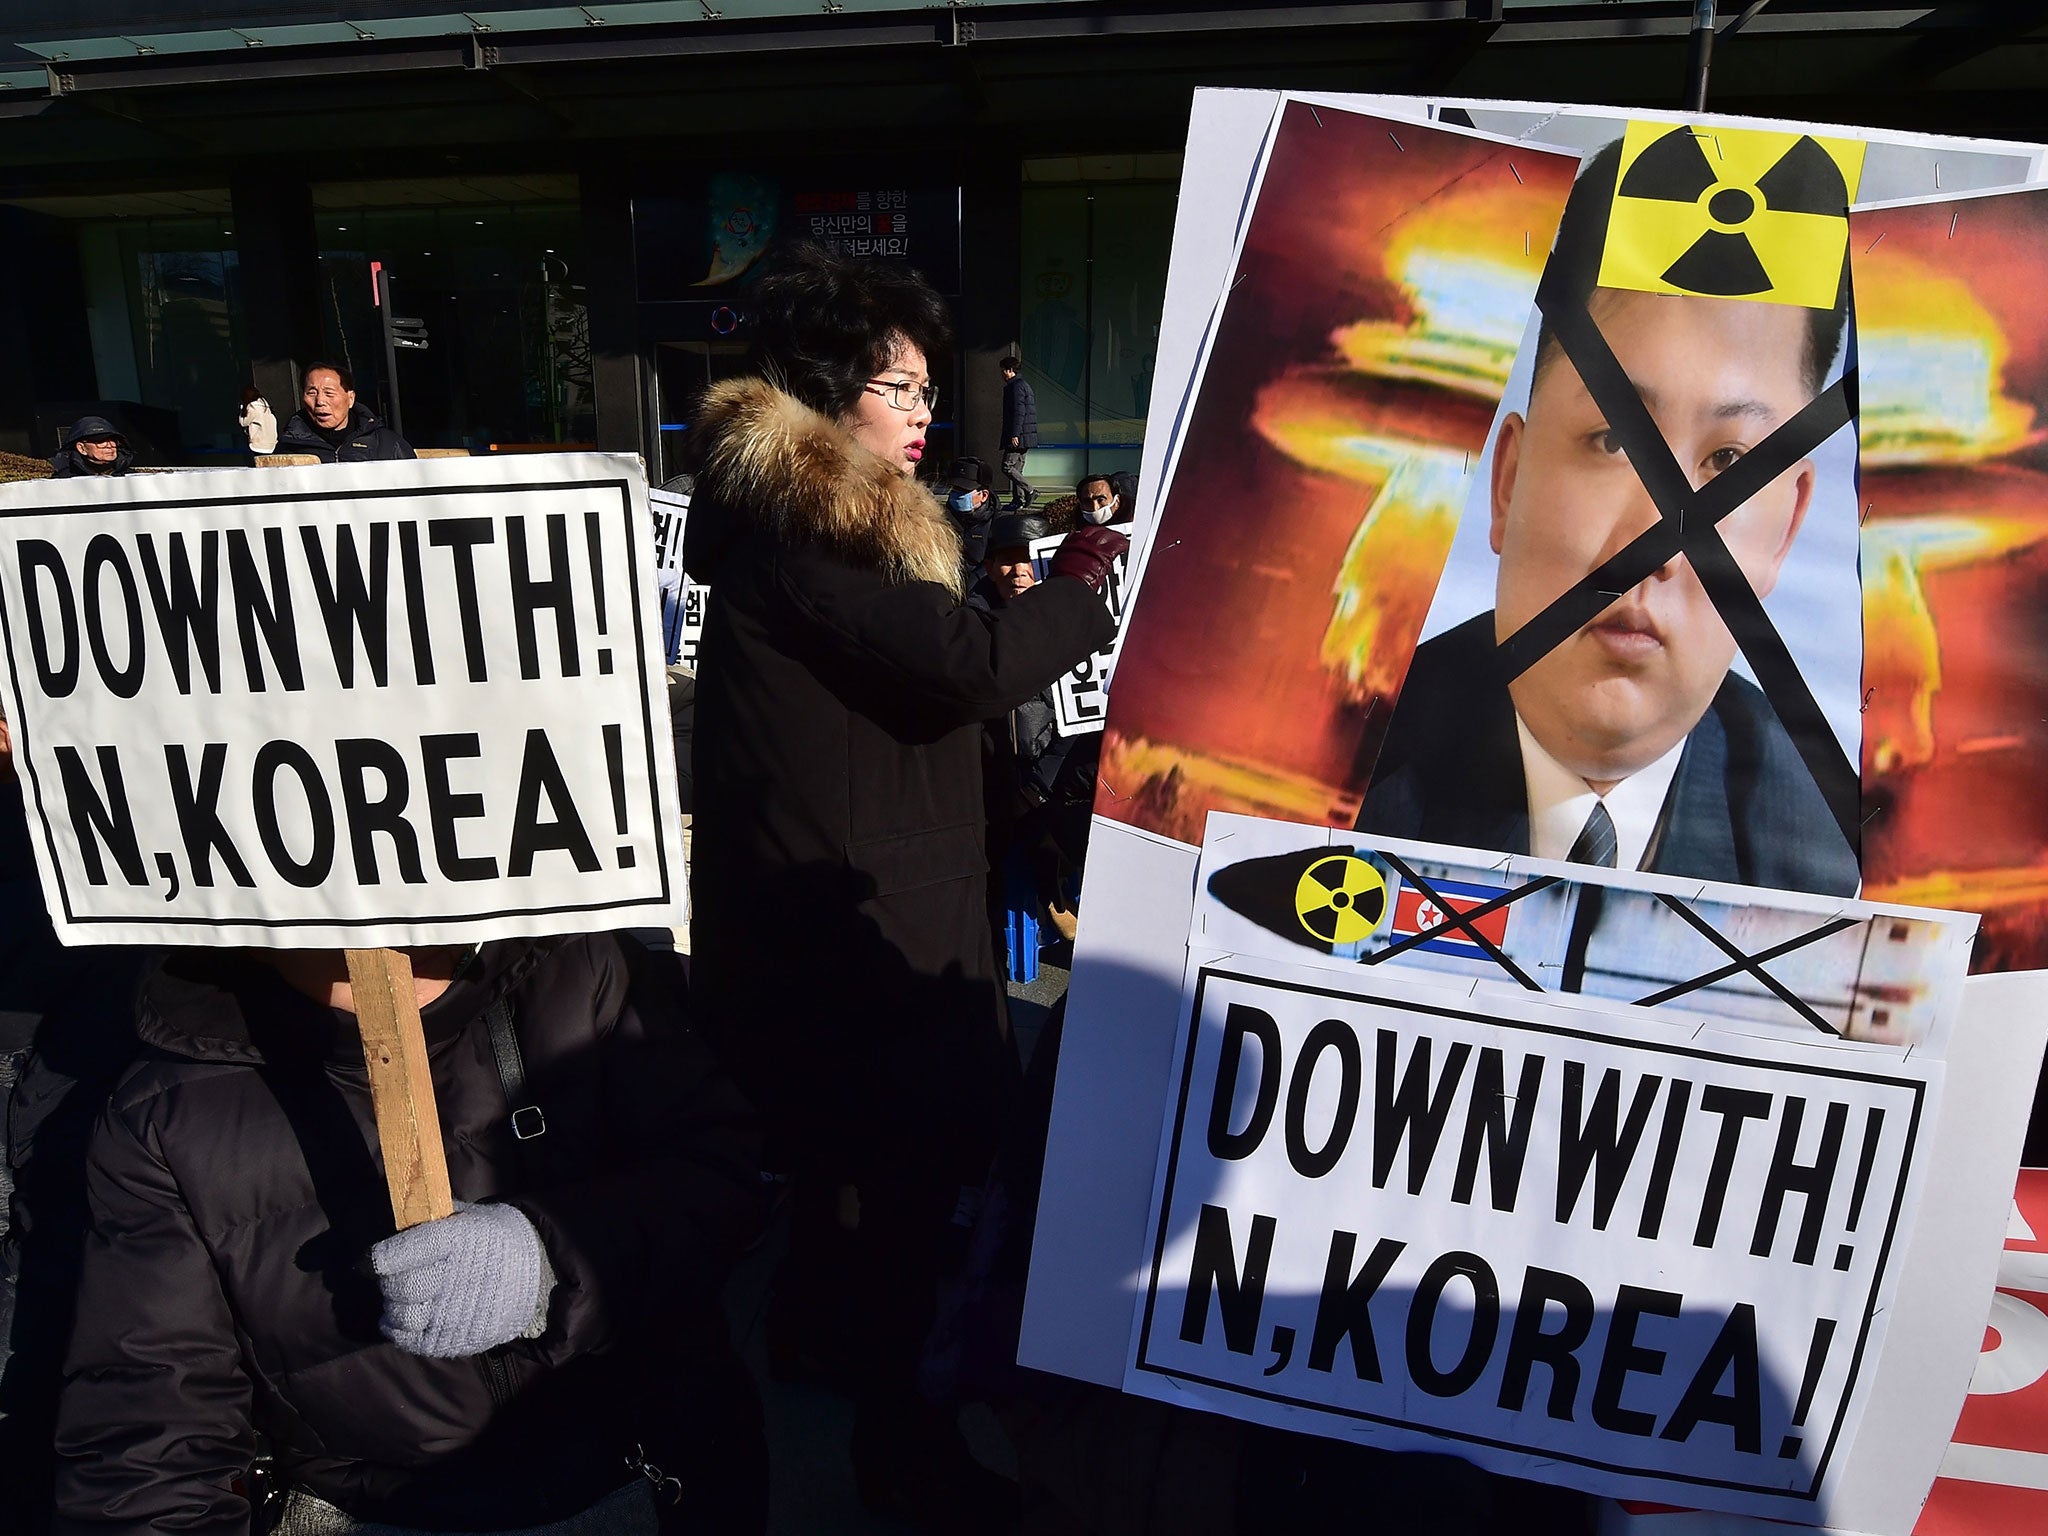 Activists in South Korea have condemned the news of nuclear testing from Pyongang